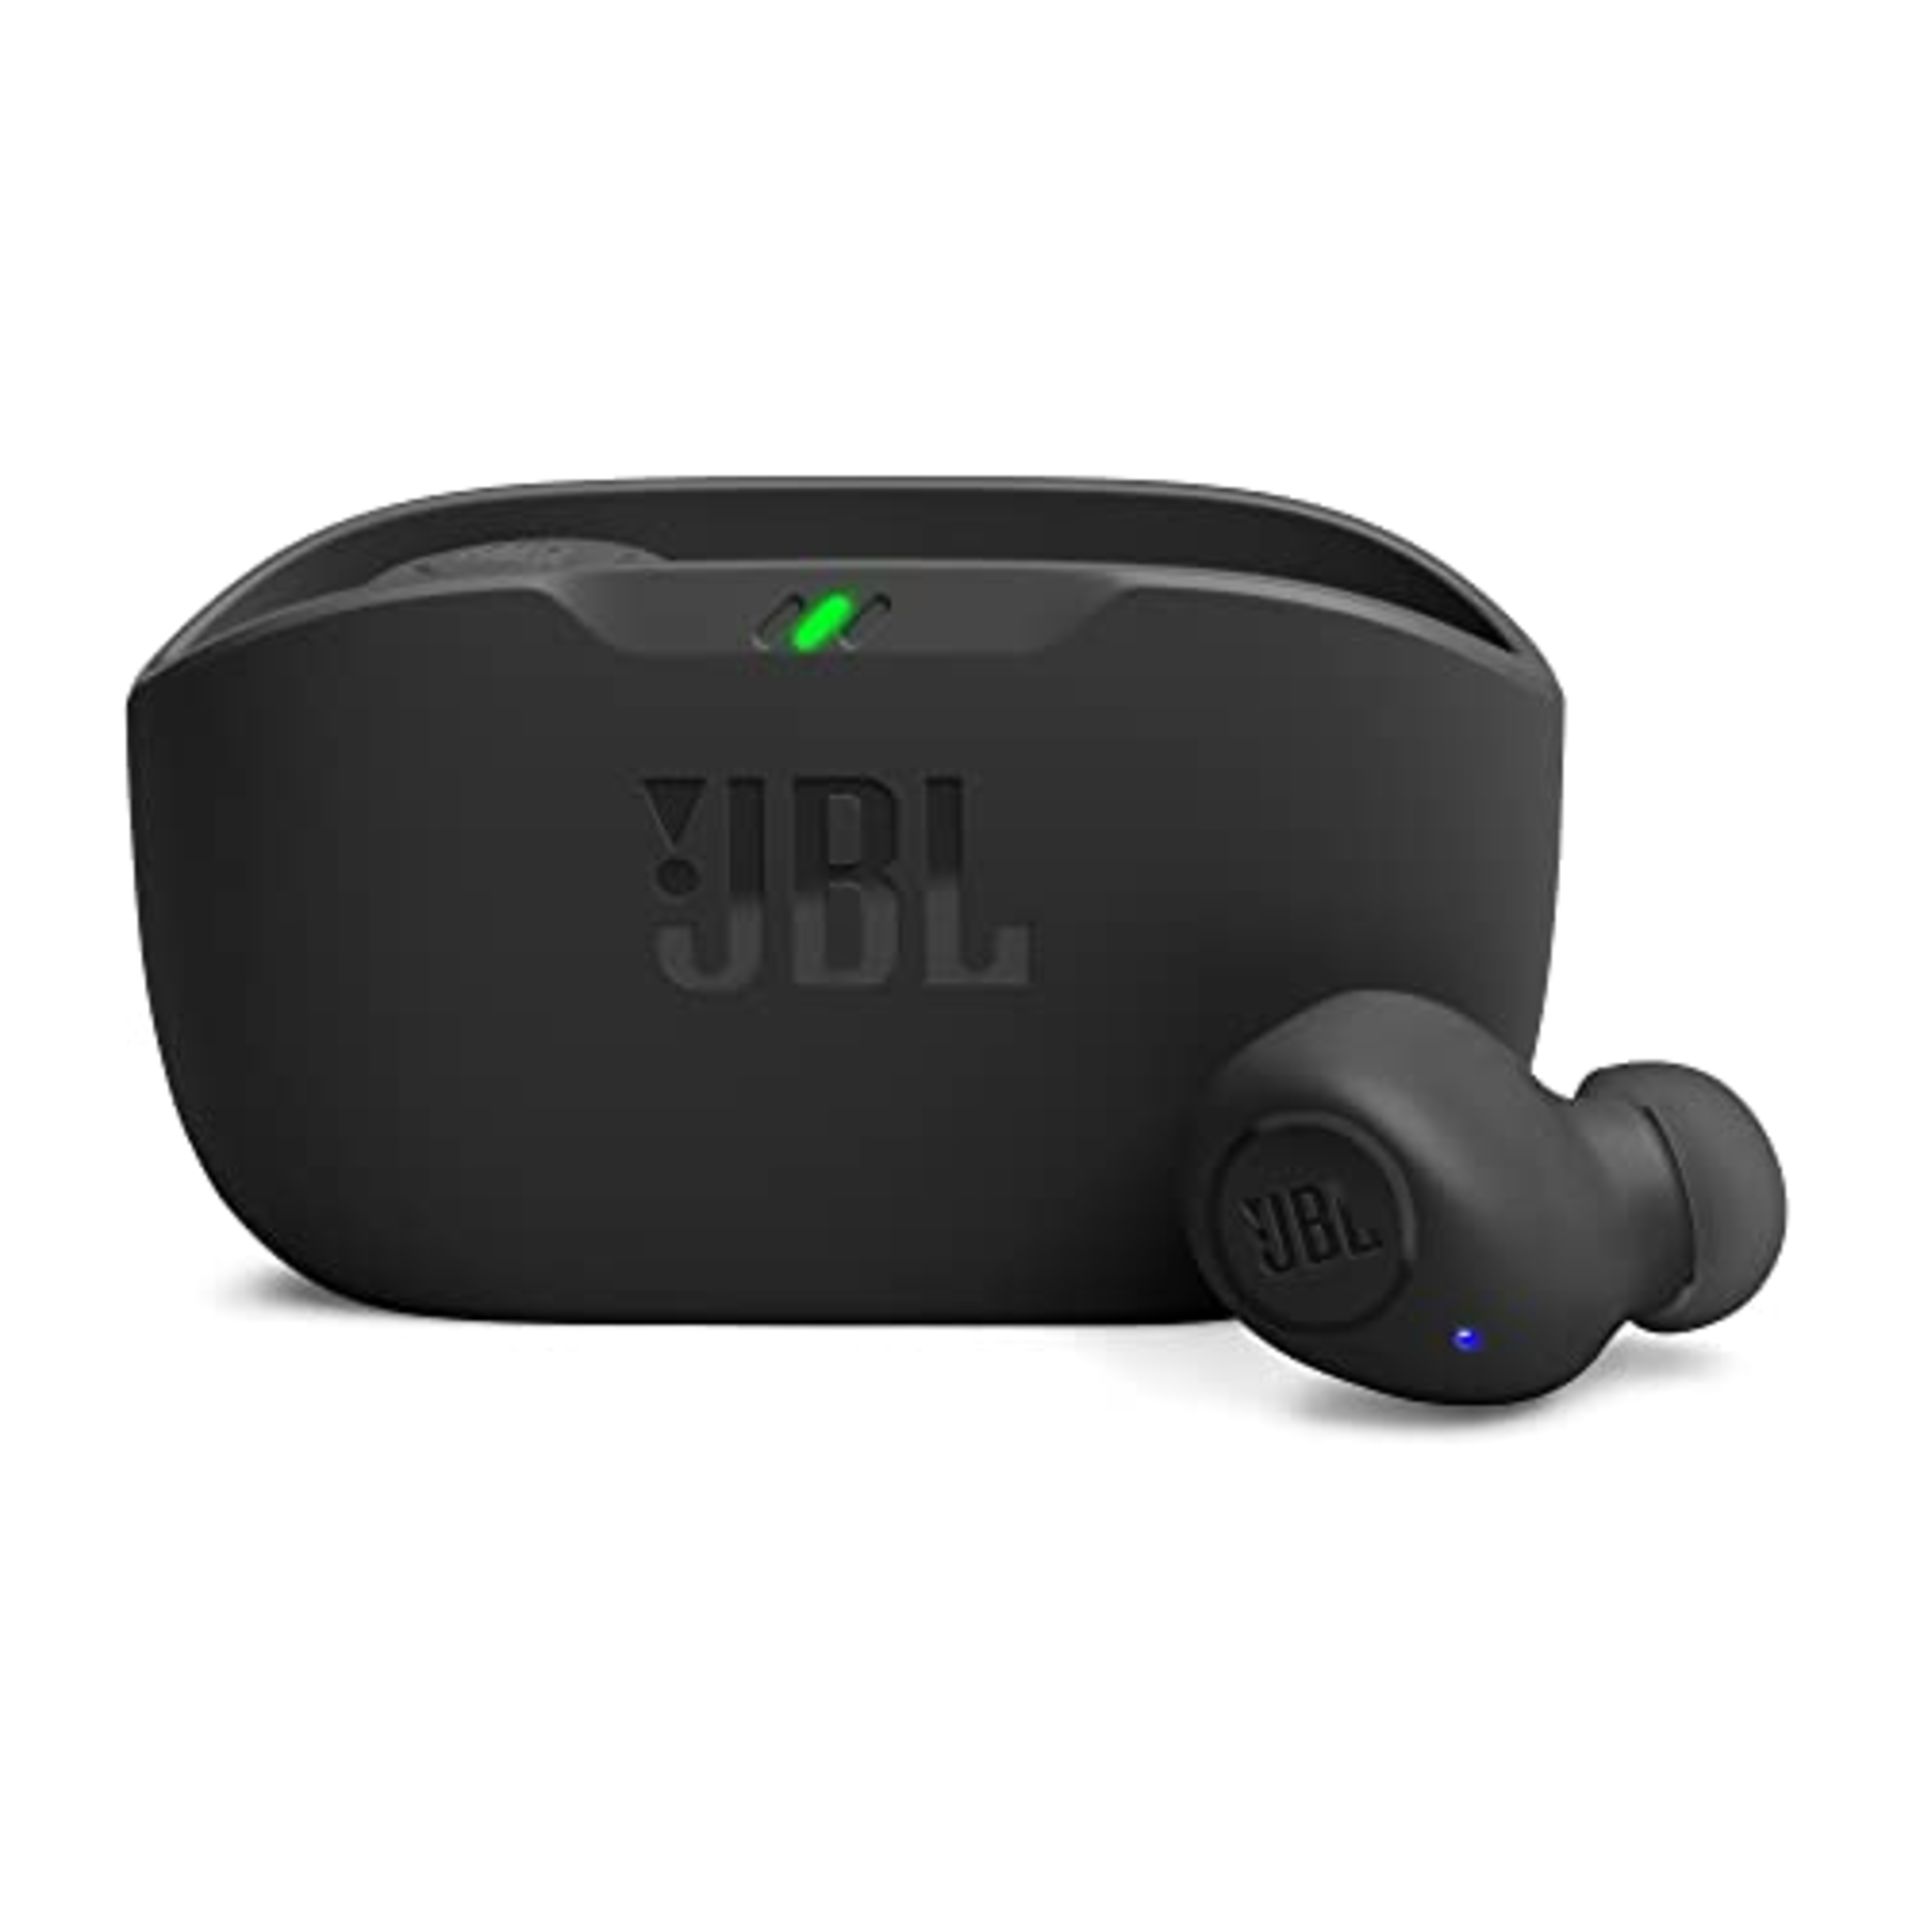 JBL Wave Buds - Wireless In-Ear Earbuds with IP54 and IPX2 waterproofing - Powerful ba - Image 4 of 6